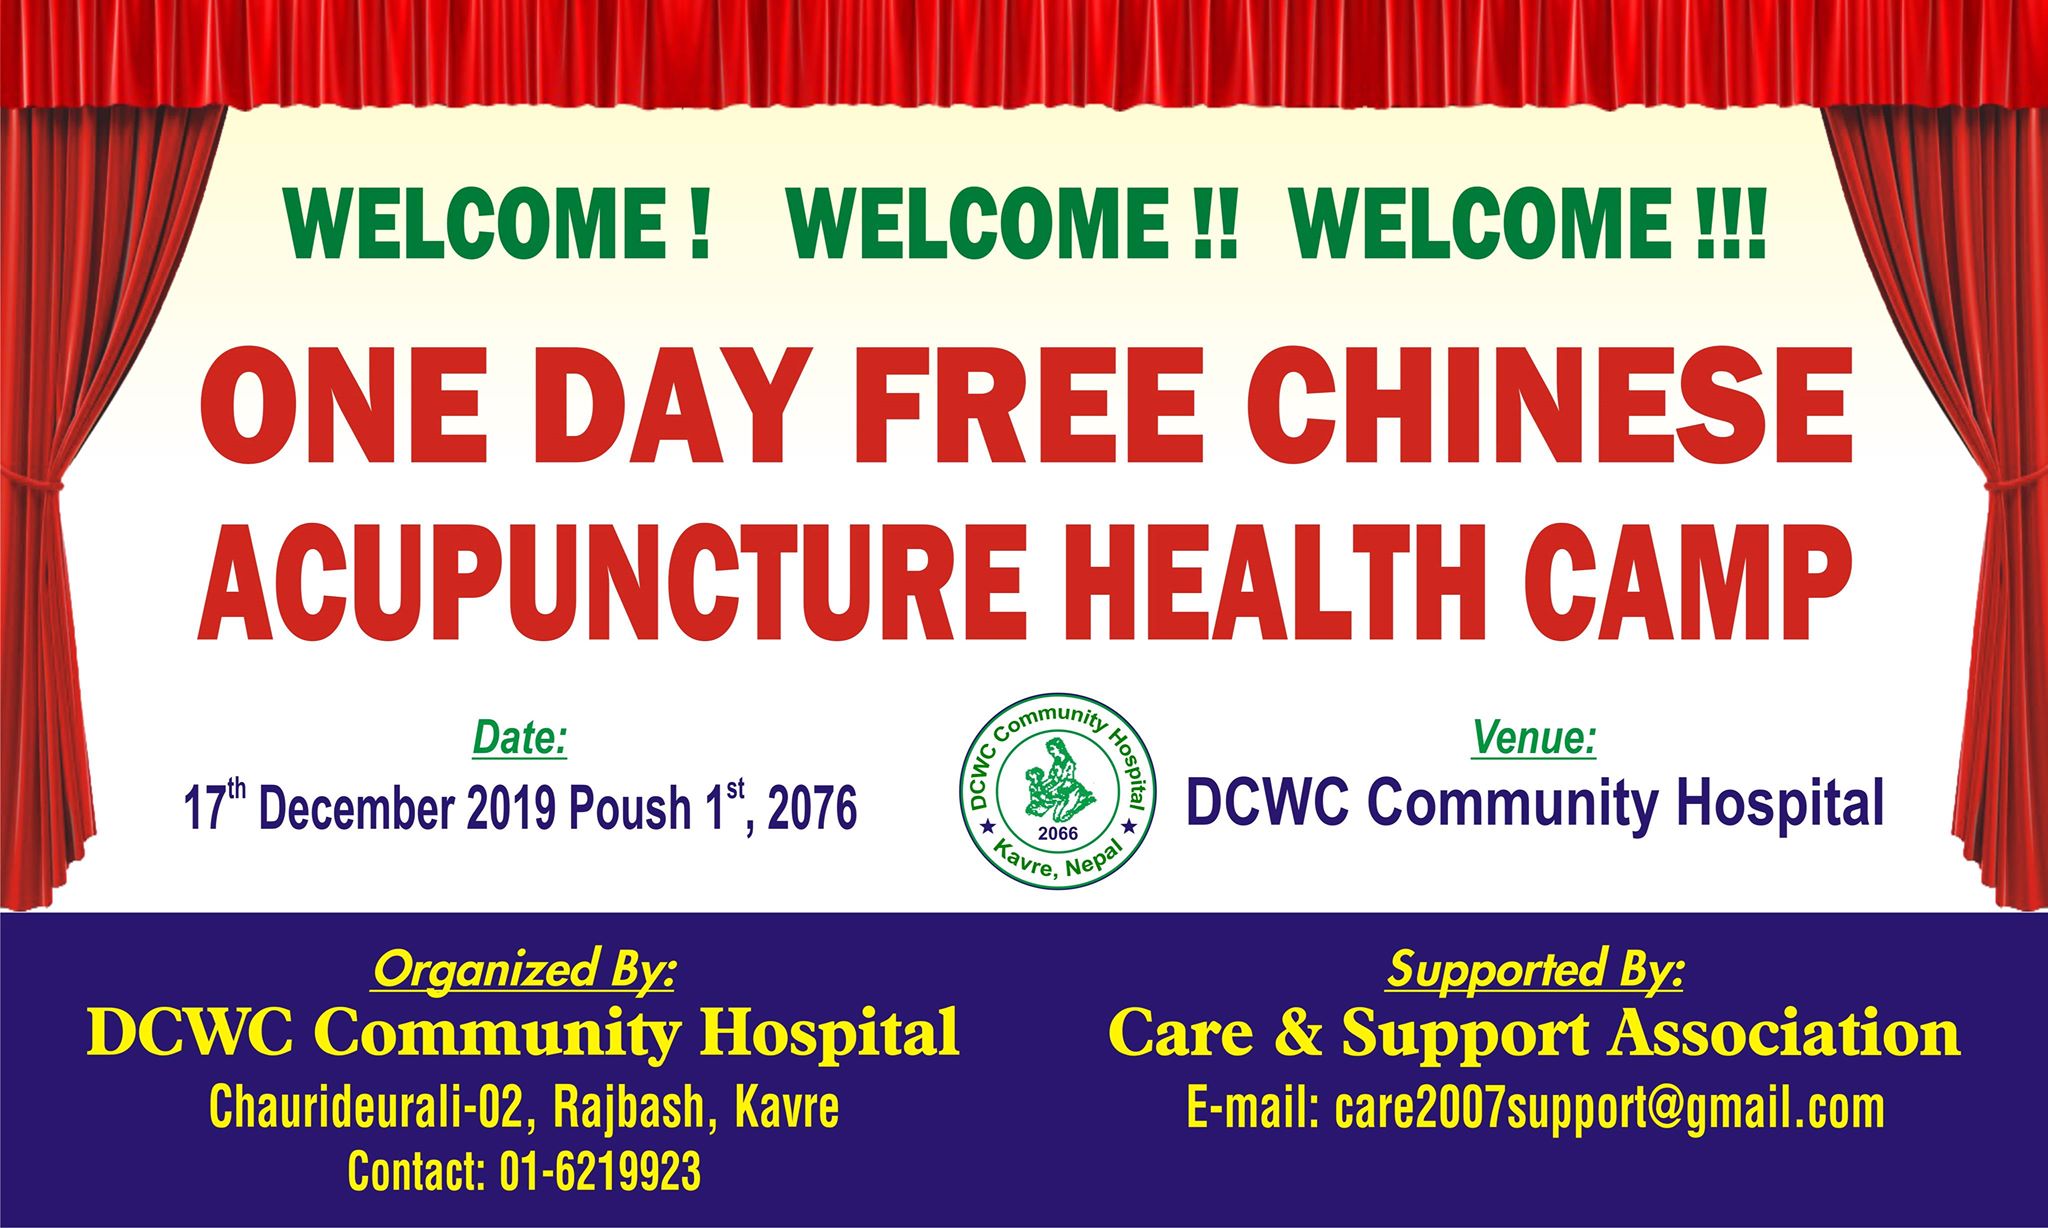 One day free Chinese Acupuncture Camp held @ Rajbash, Chaurideurali-2, Kavre